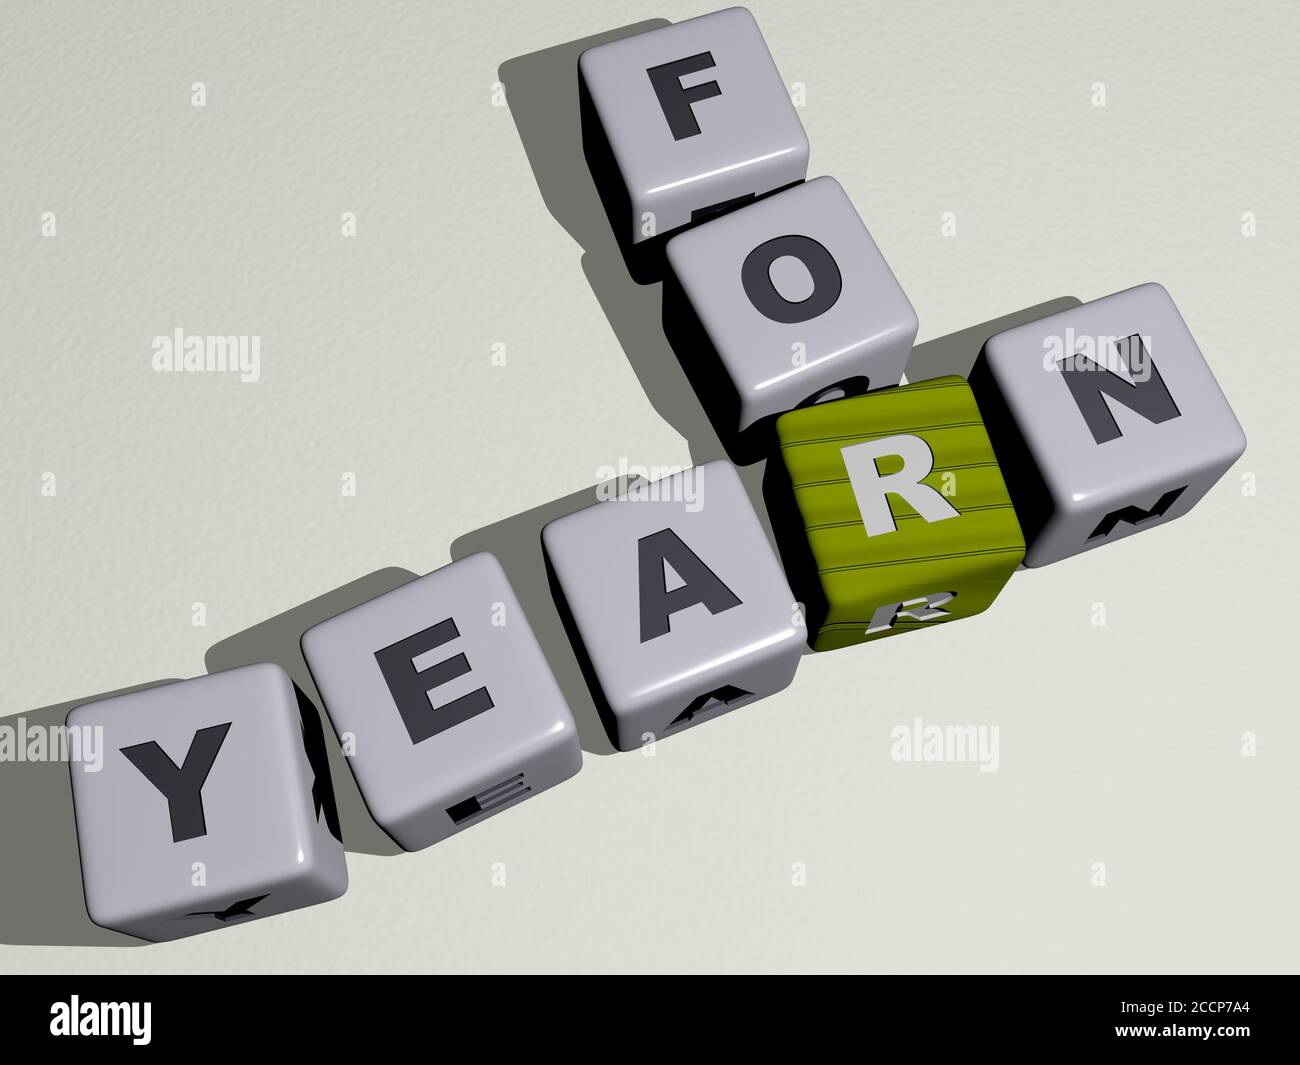 beauty: yearn for crossword by cubic dice letters, 3D illustration Stock Photo